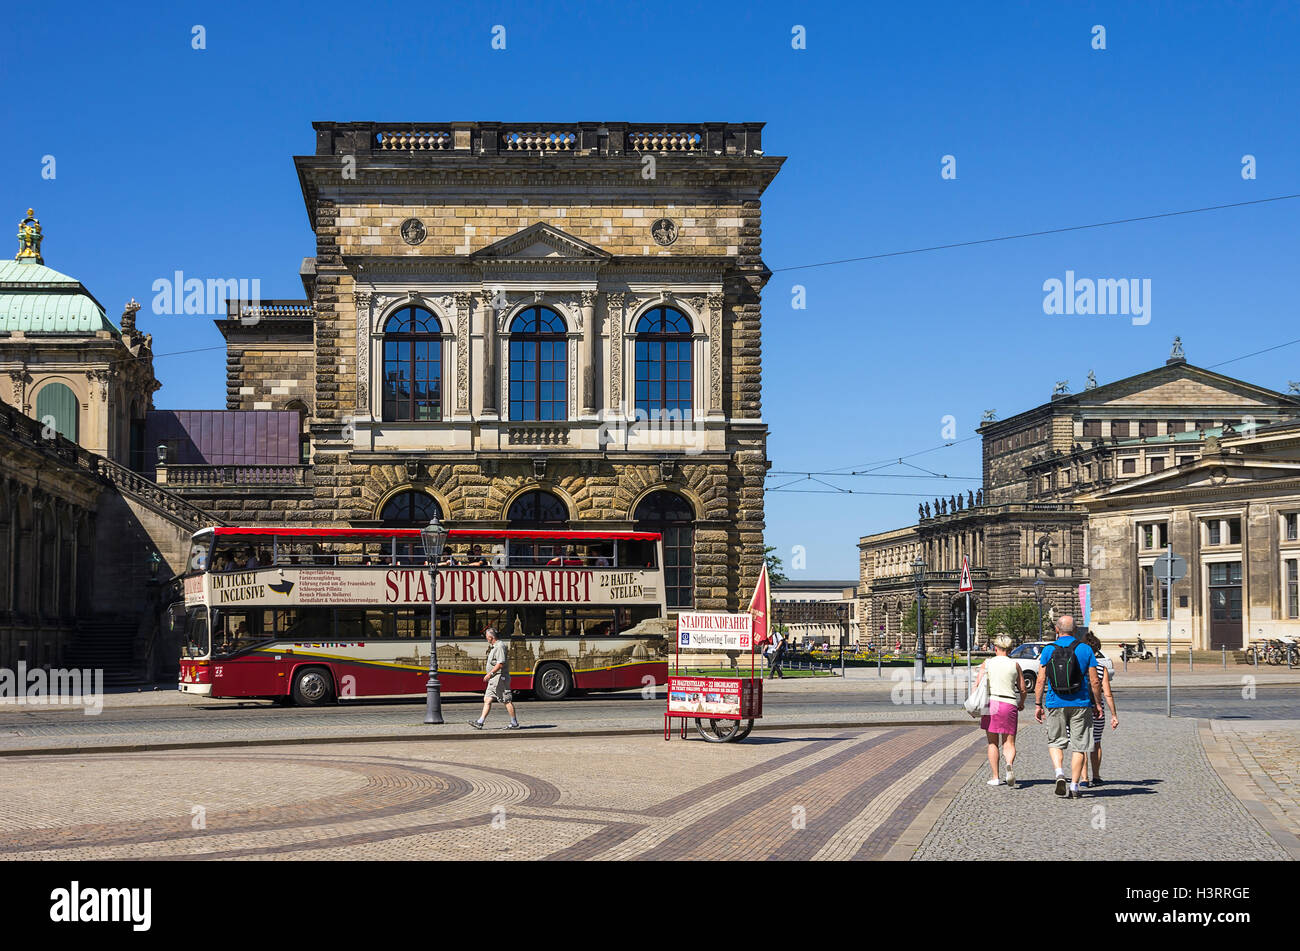 Ticket booth and bus for sightseeing tours in the city of Dresden, Saxony, Germany. Stock Photo